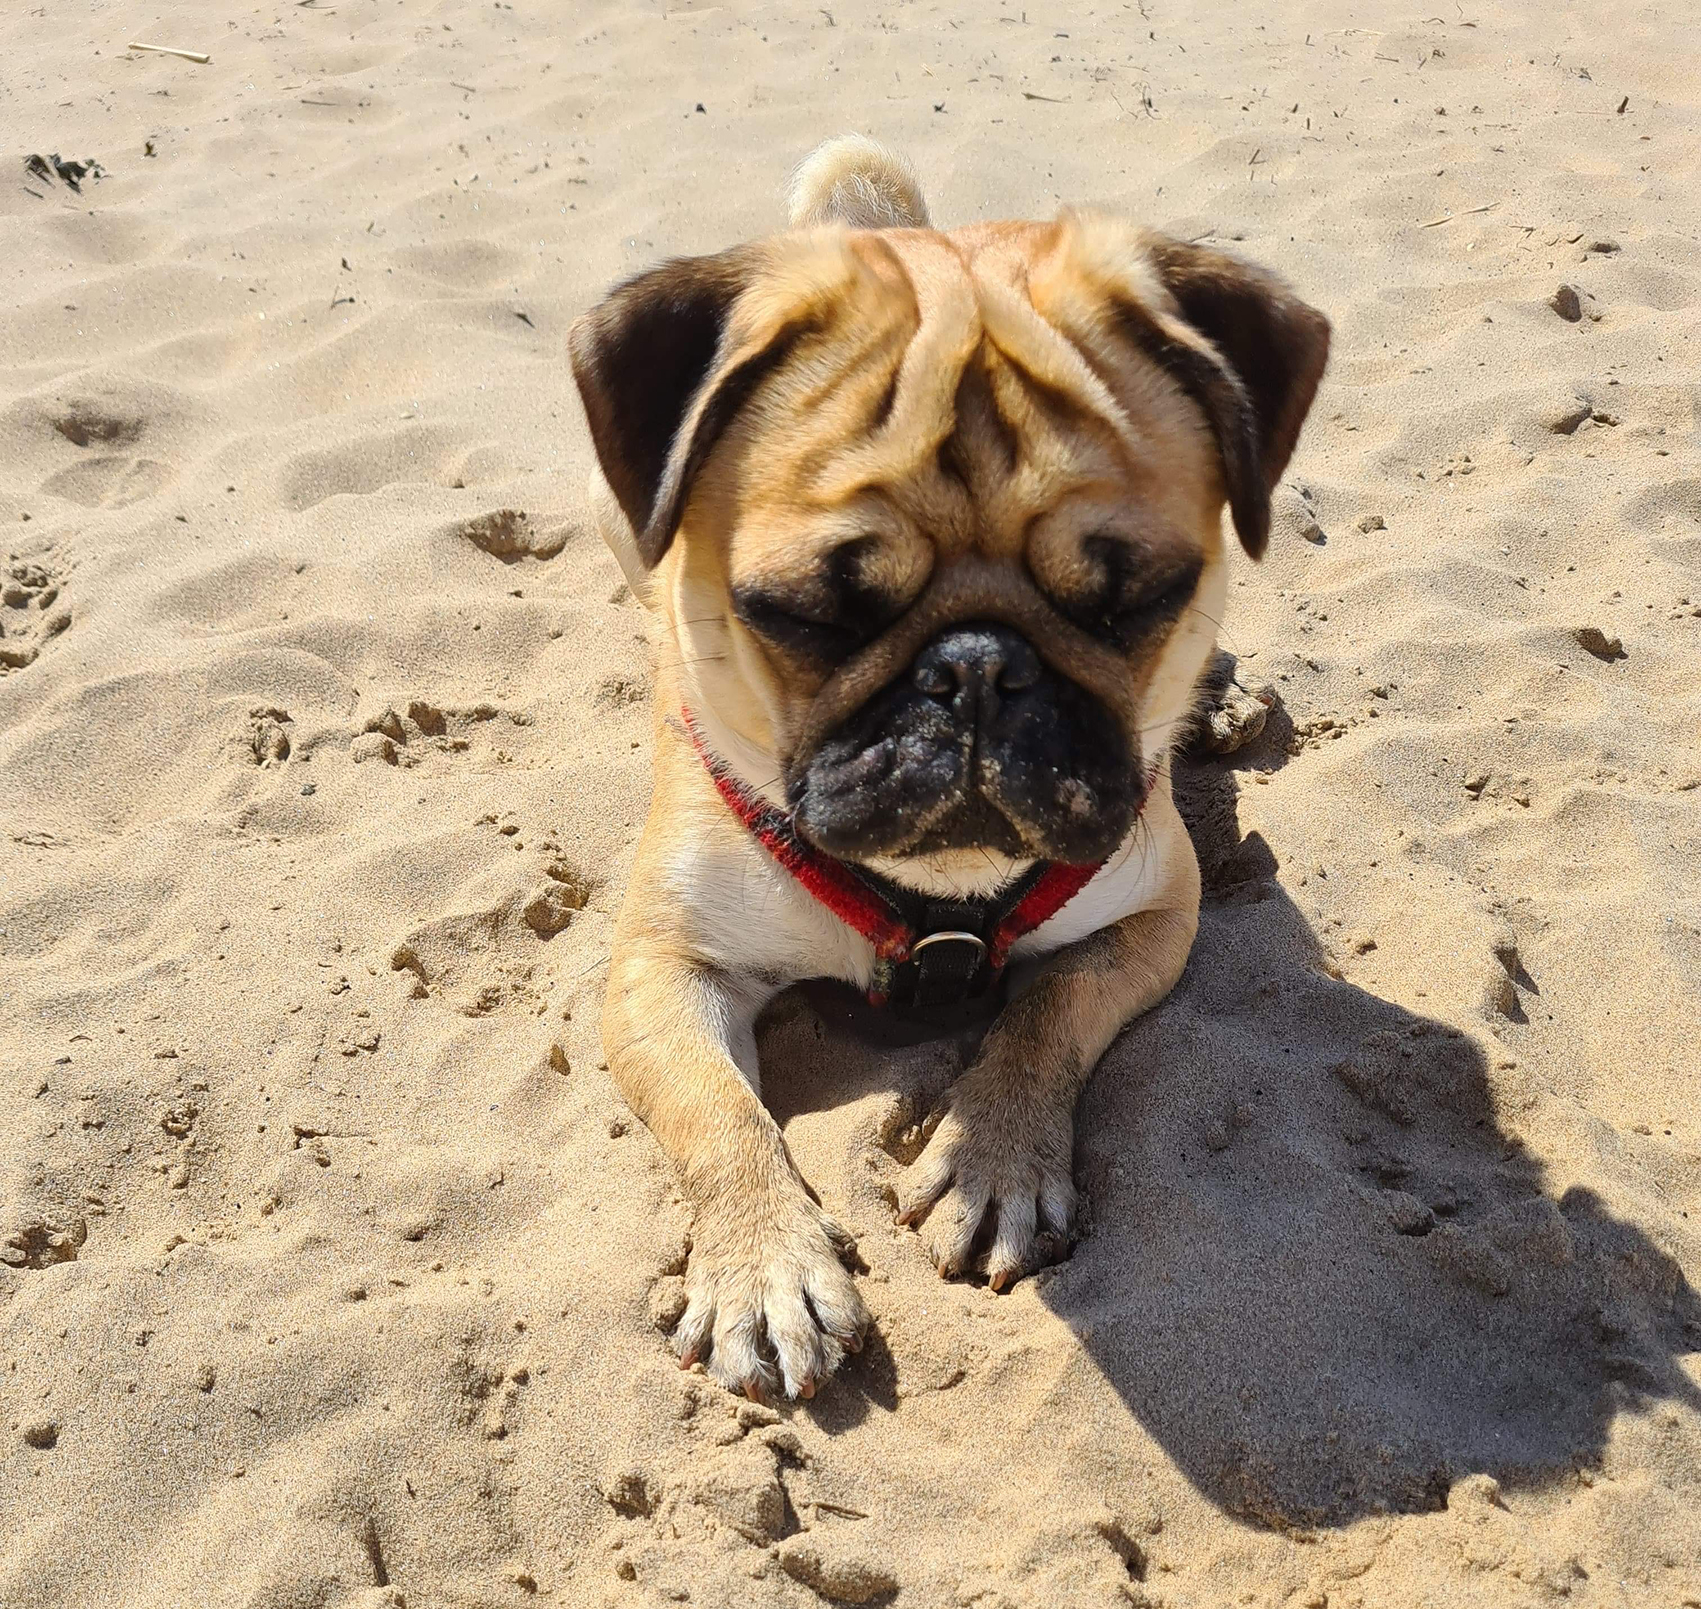 Wheels for Charlie - image Beau on https://pugprotectiontrust.org